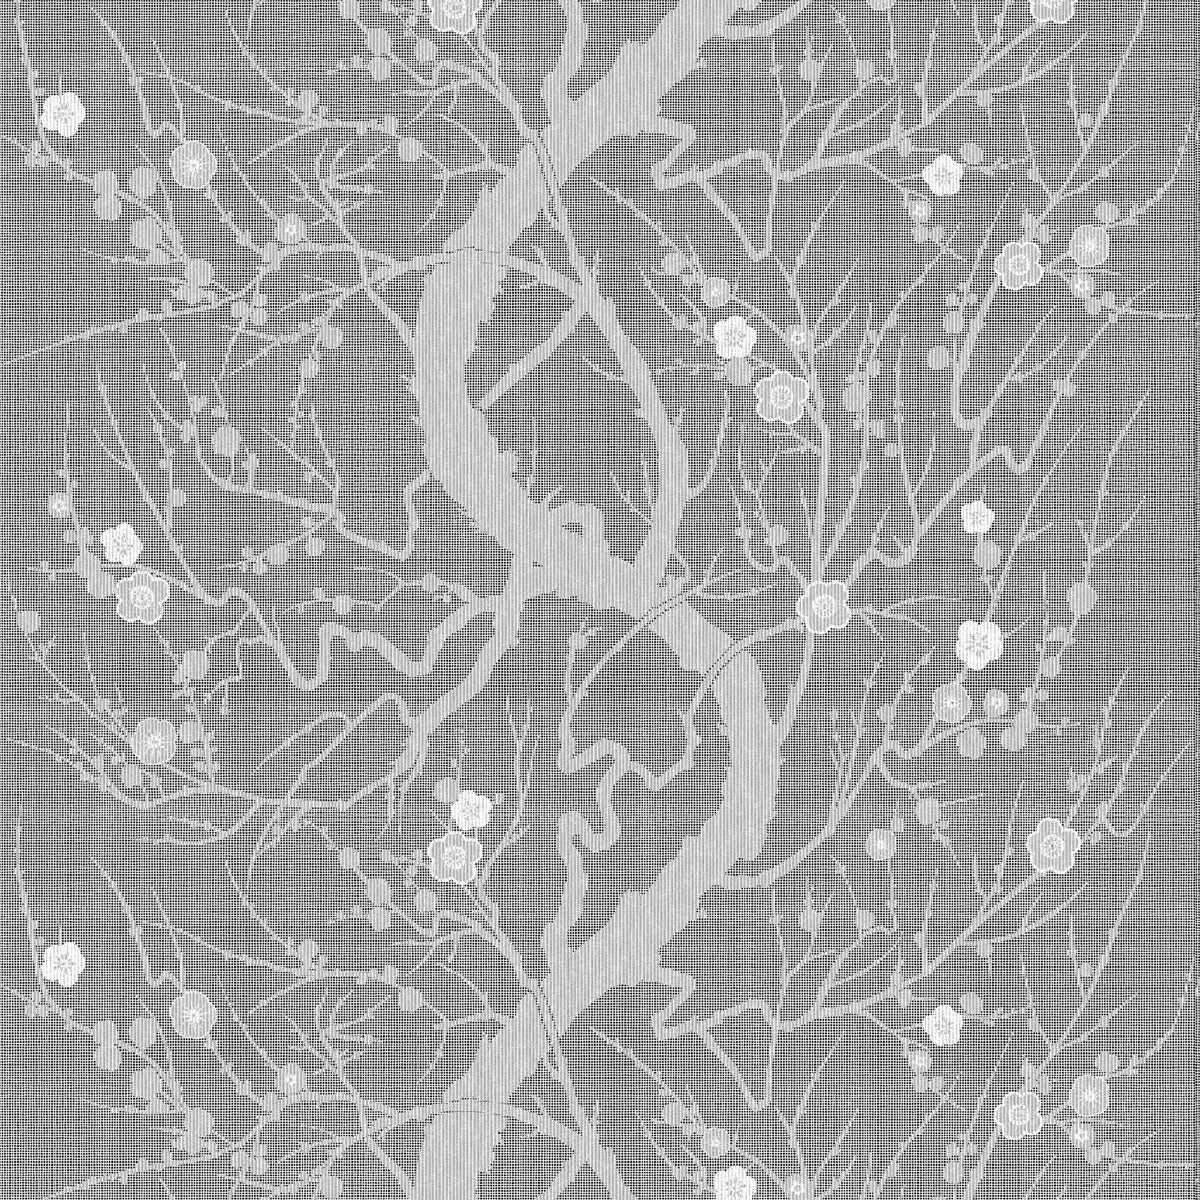 spring blossom lace fabric by timorous beasties on adorn.house